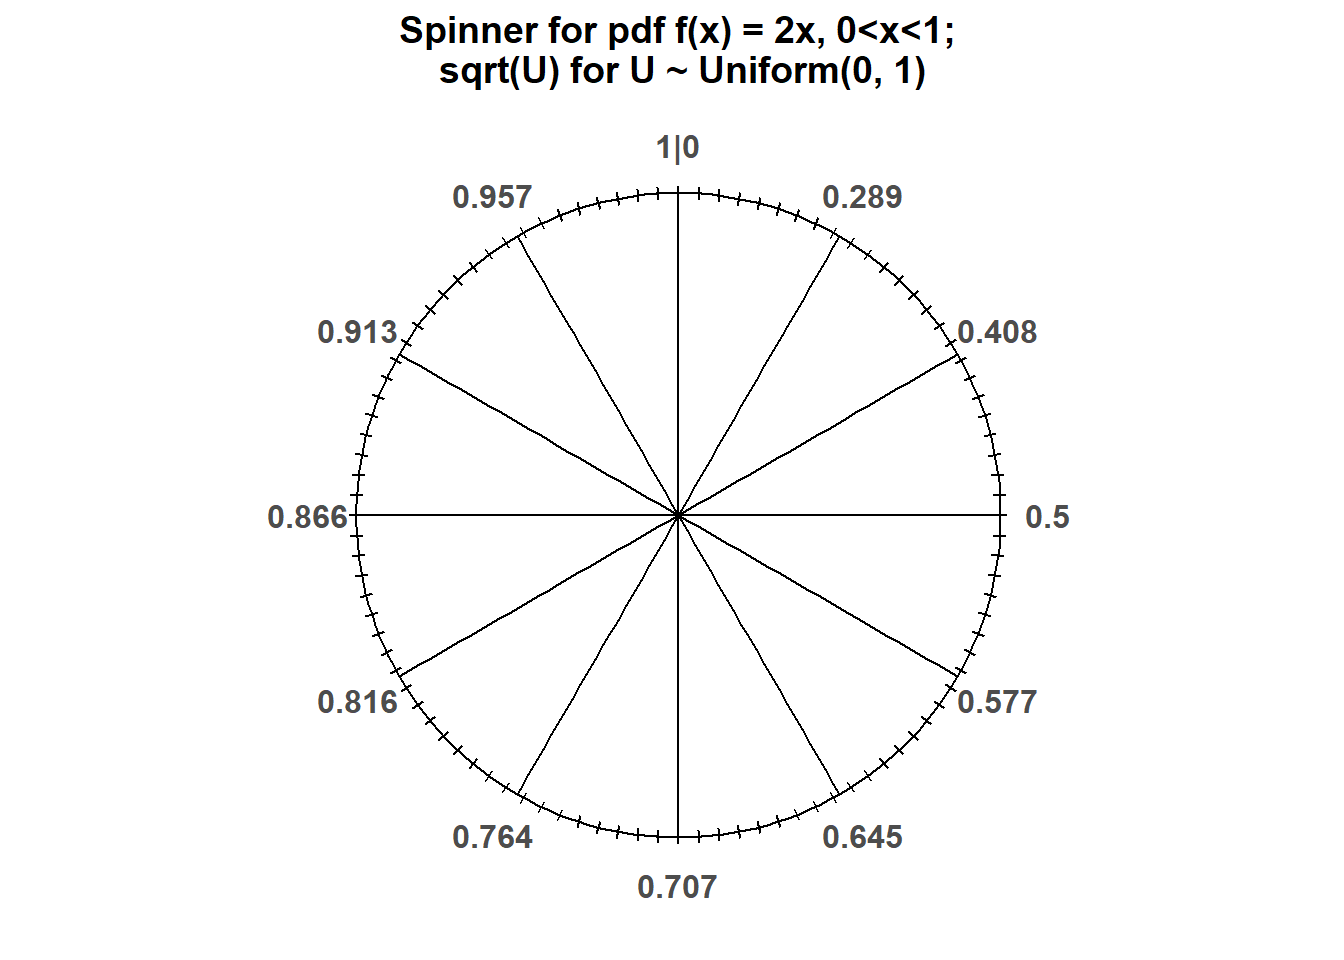 Spinner for \(X\) in Example 4.23. The axis is transformed according to the quantile function \(Q(p) = \sqrt{p}\).